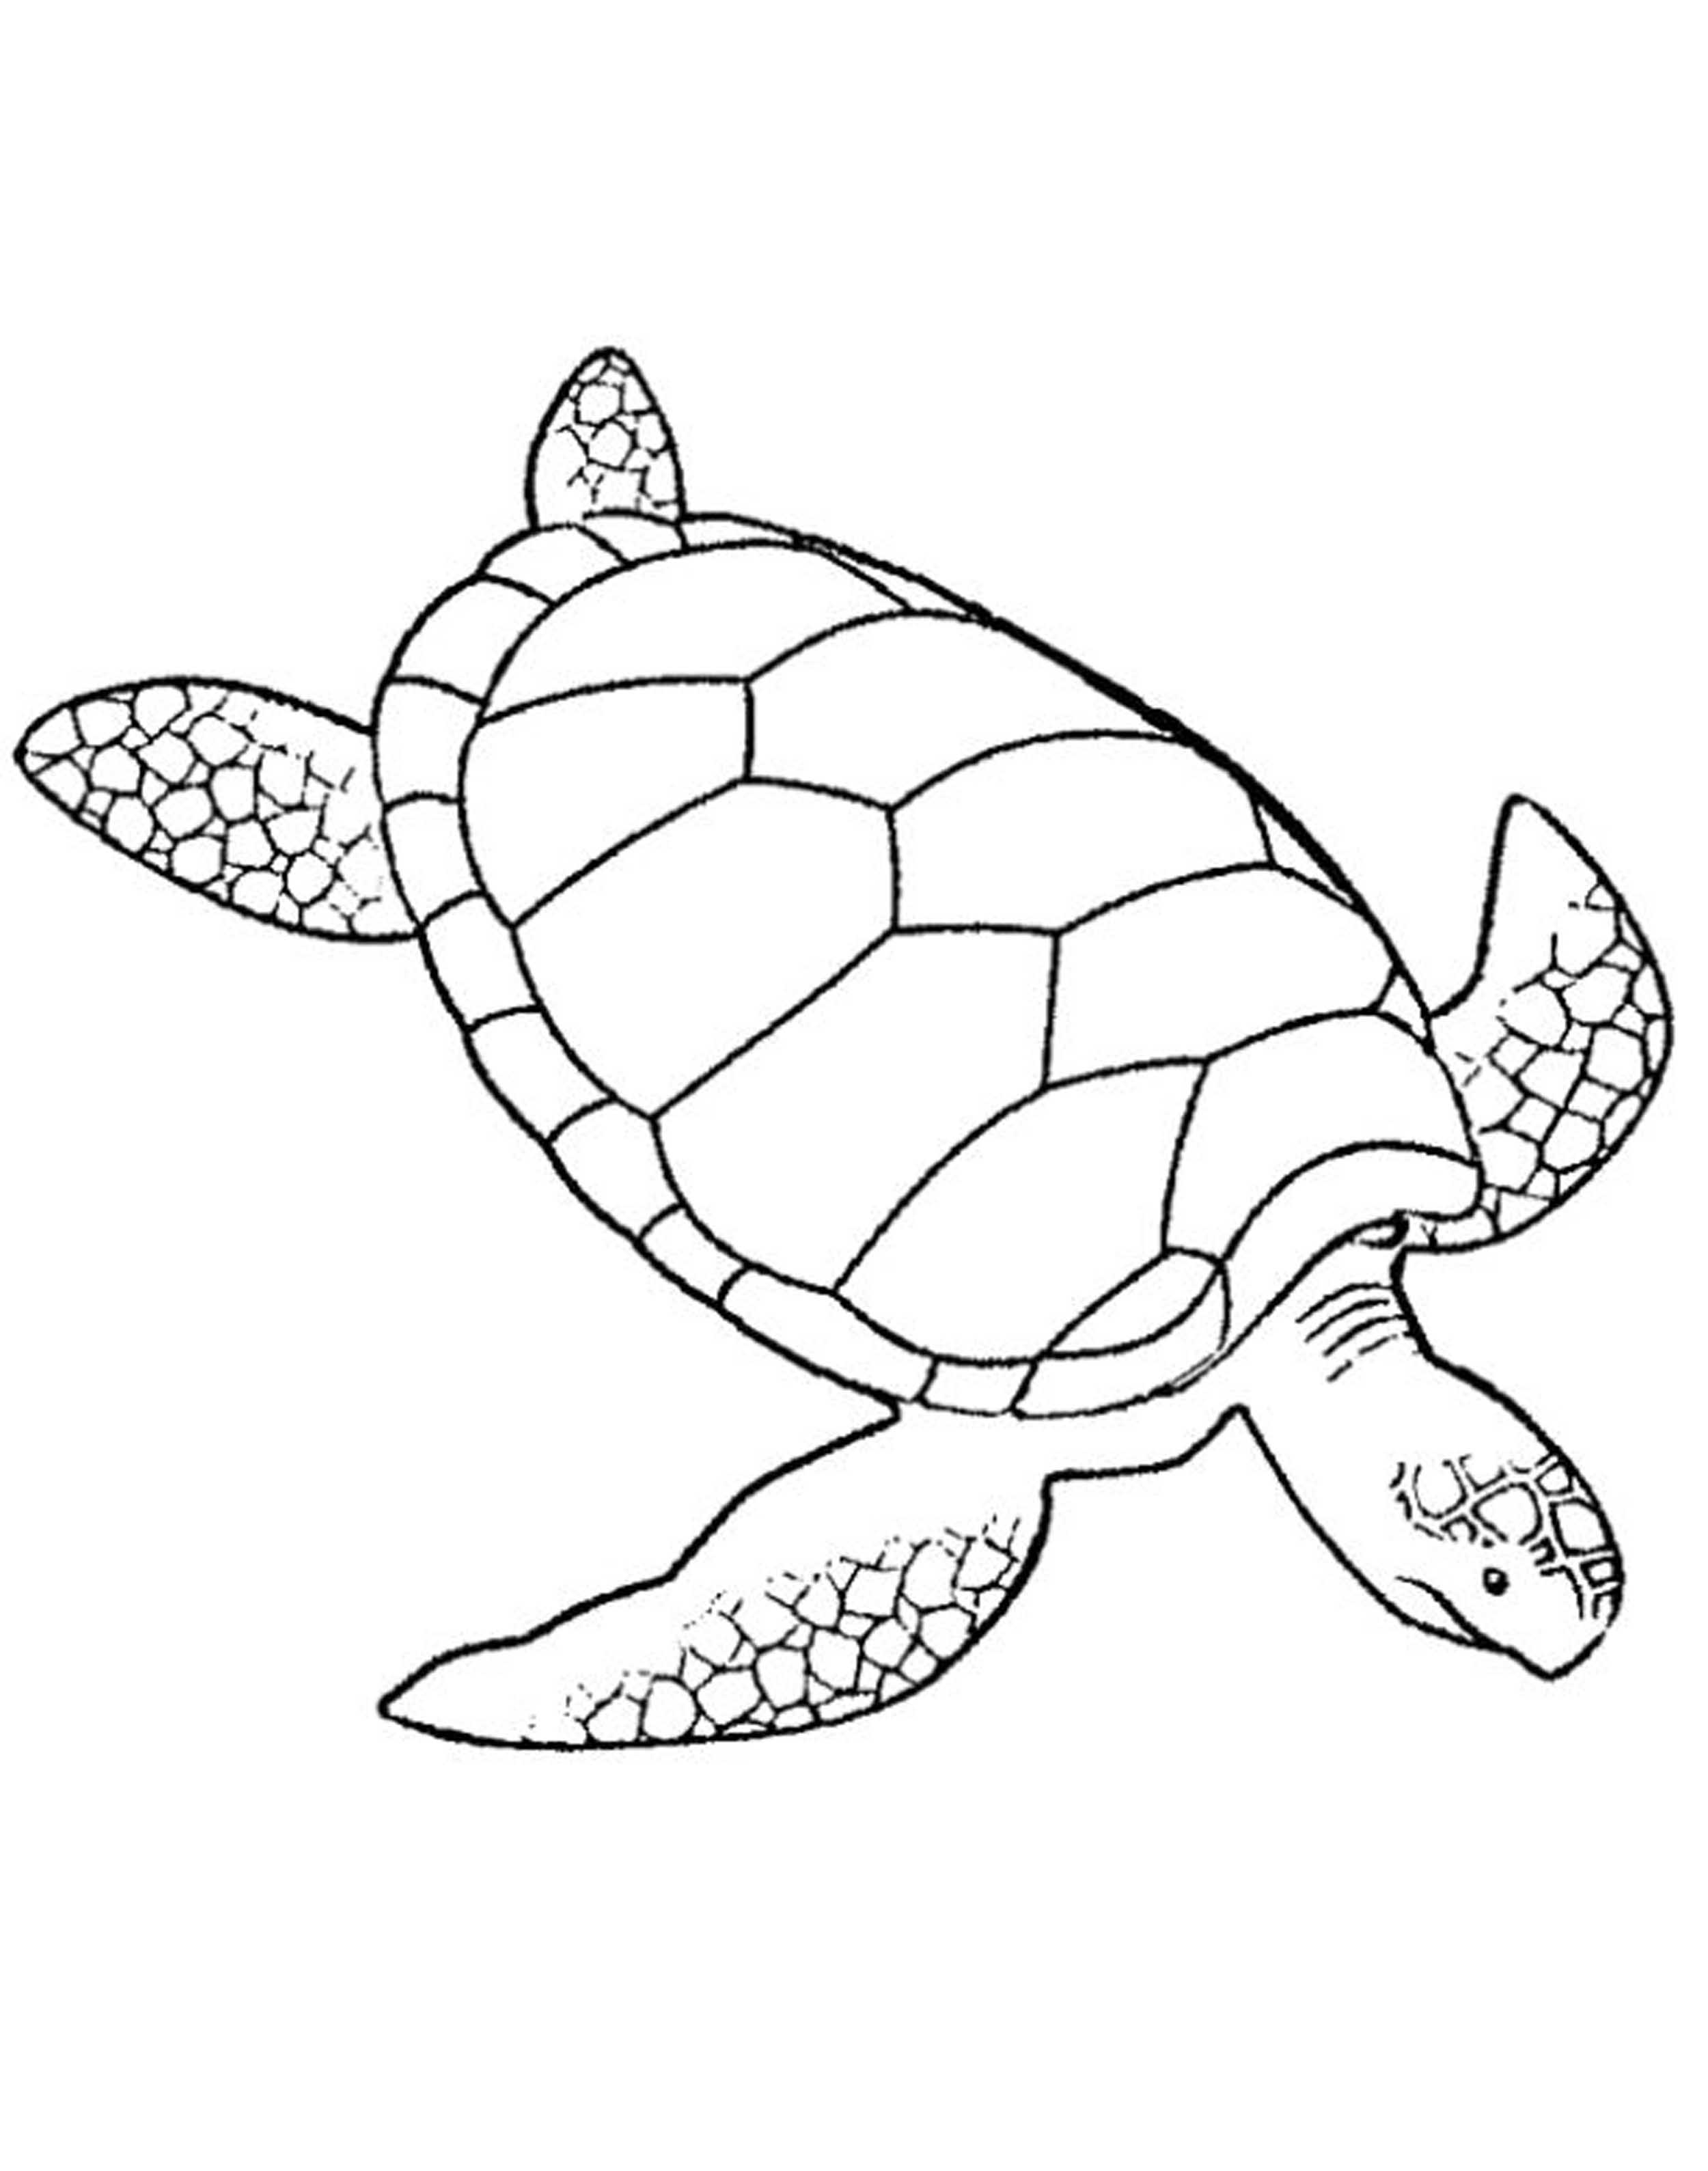 Print & Download - Turtle Coloring Pages as the Educational Tool